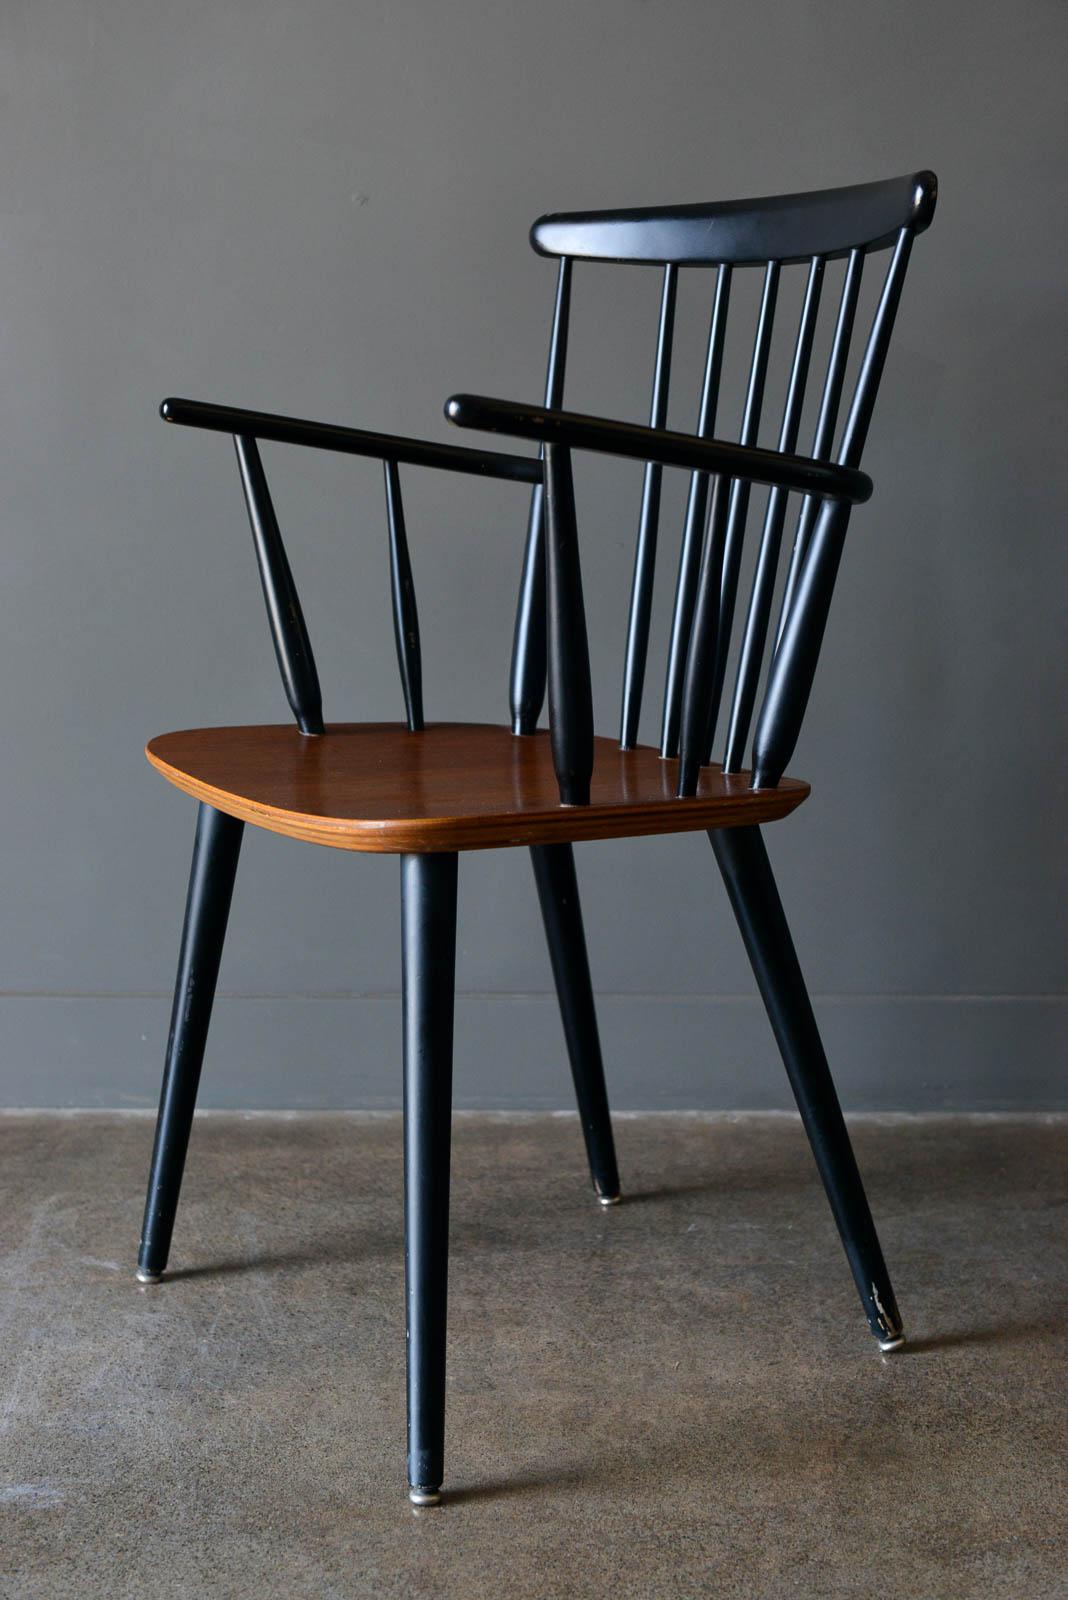 Danish spindle back arm chair by Thomas Harlev for Farstrup, 1960. Single dining chair with age appropriate wear but in good condition. Two tone black frame and legs with teak seat. 

Measures 21